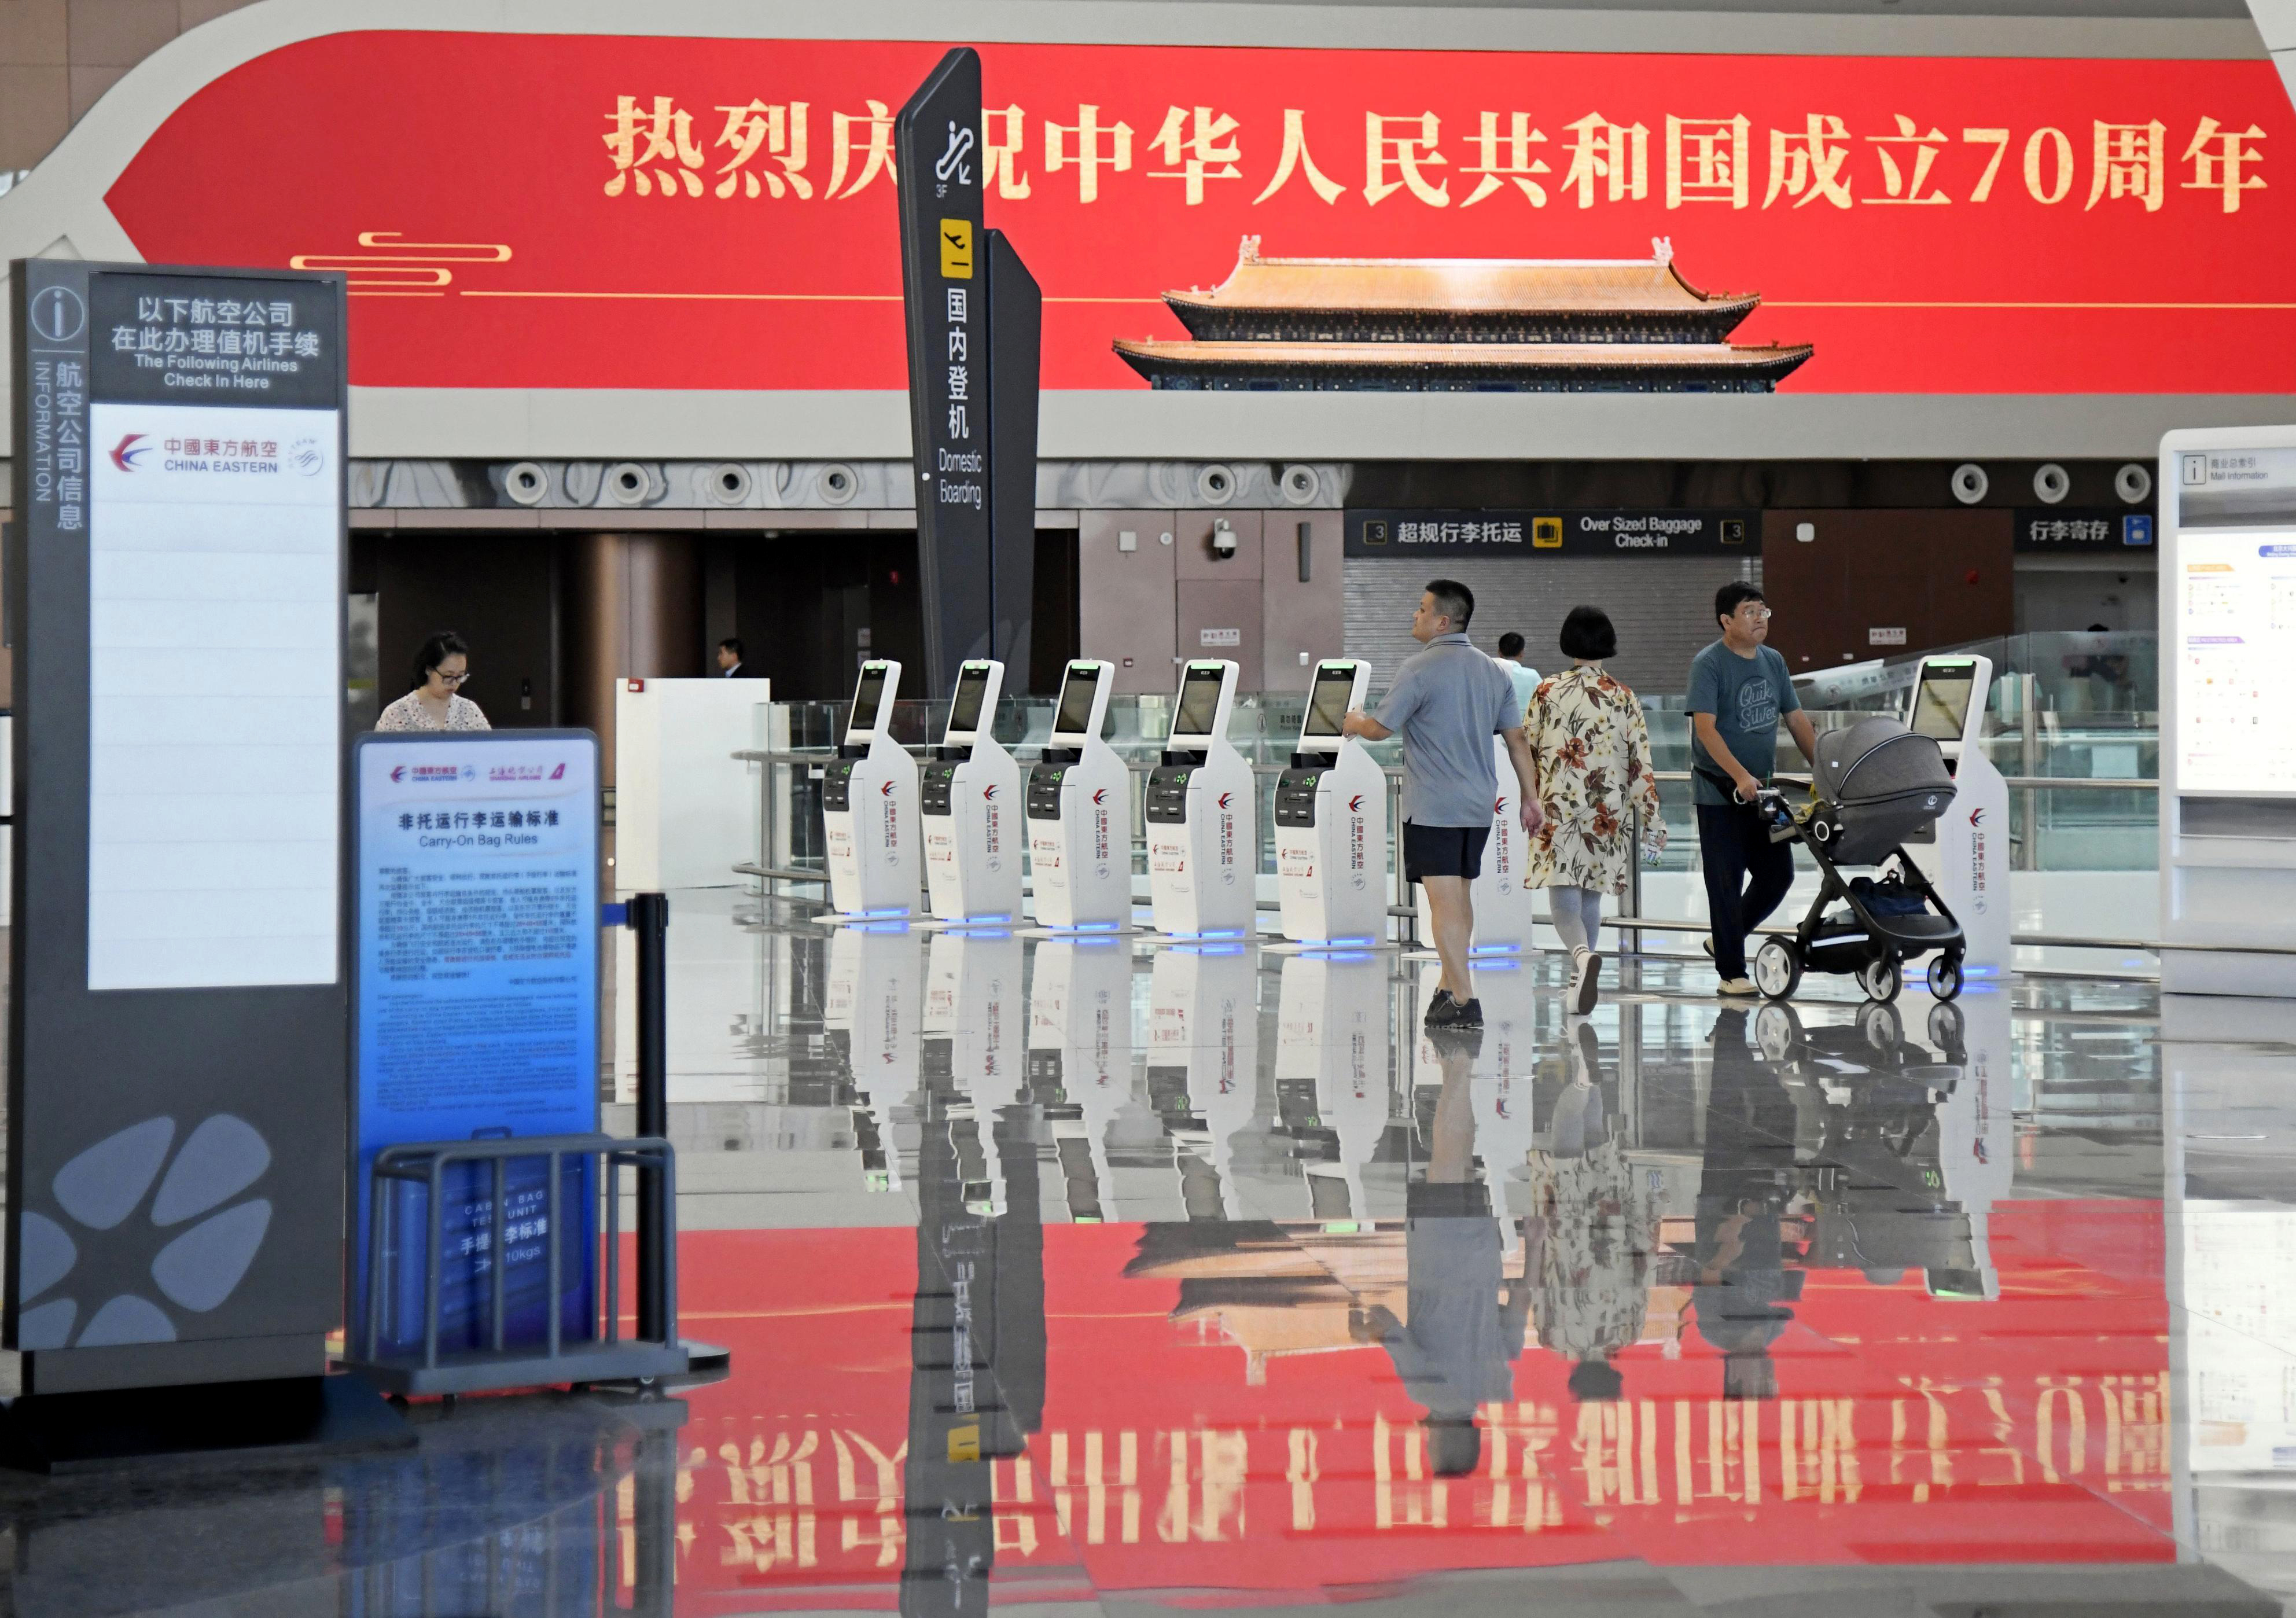 Visitors walk at the departure lobby after the launching ceremony for the new Daxing International Airport ahead of the 70th founding anniversary of the People's Republic of China in Beijing, China  Wednesday, Sept. 25, 2019.(Naohiko Hatta/Kyodo News via AP)